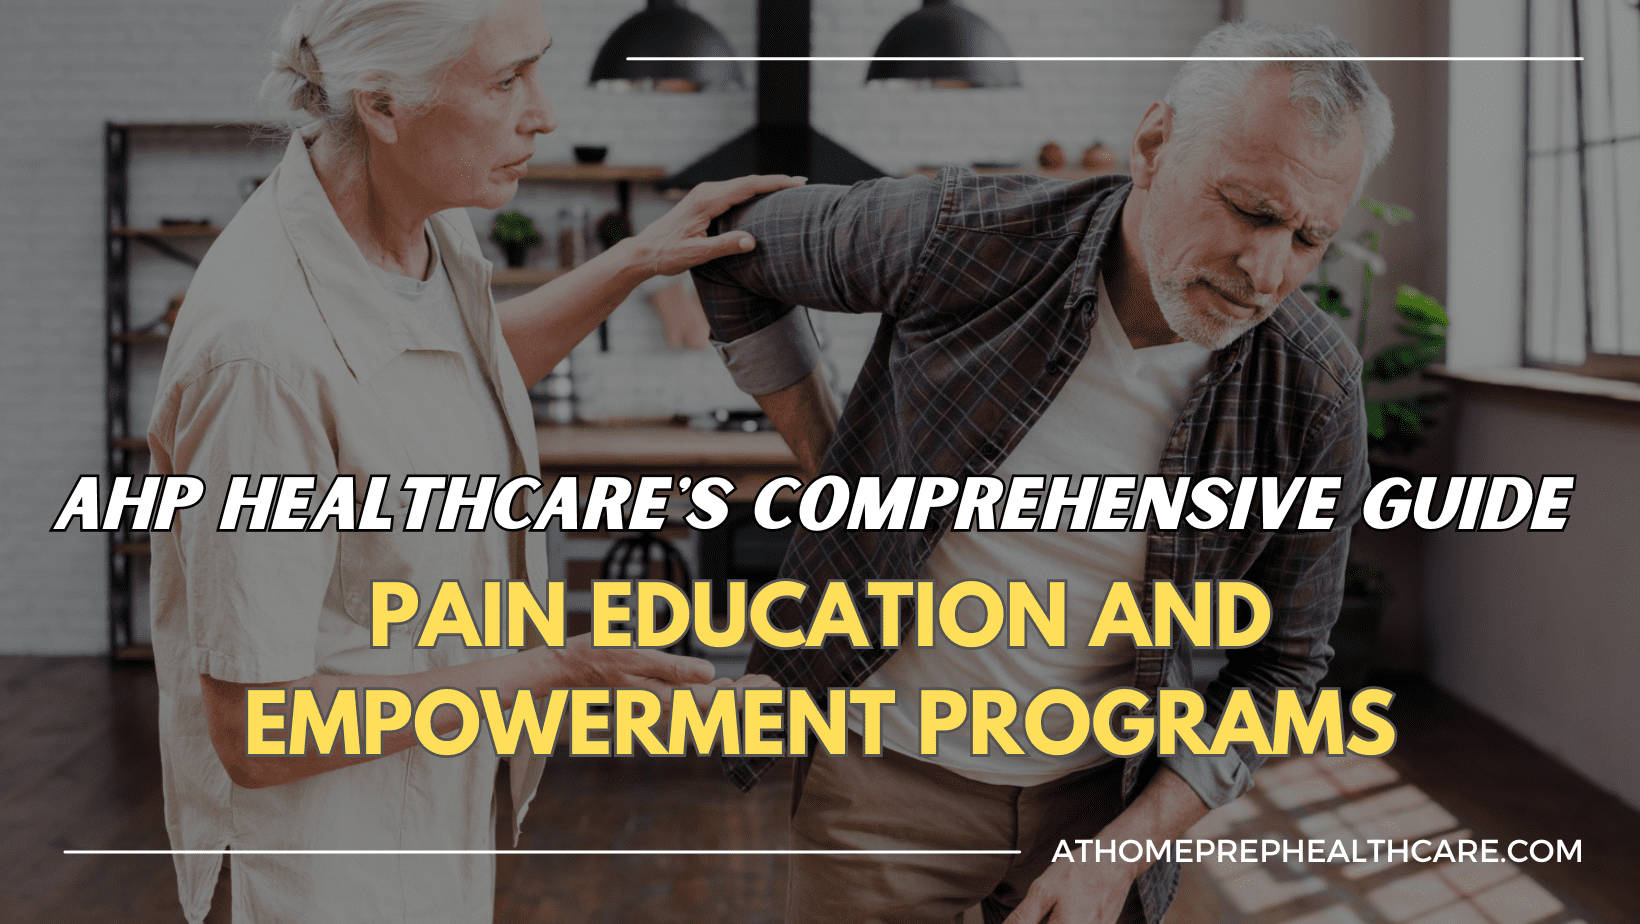 Pain Education and Empowerment Programs